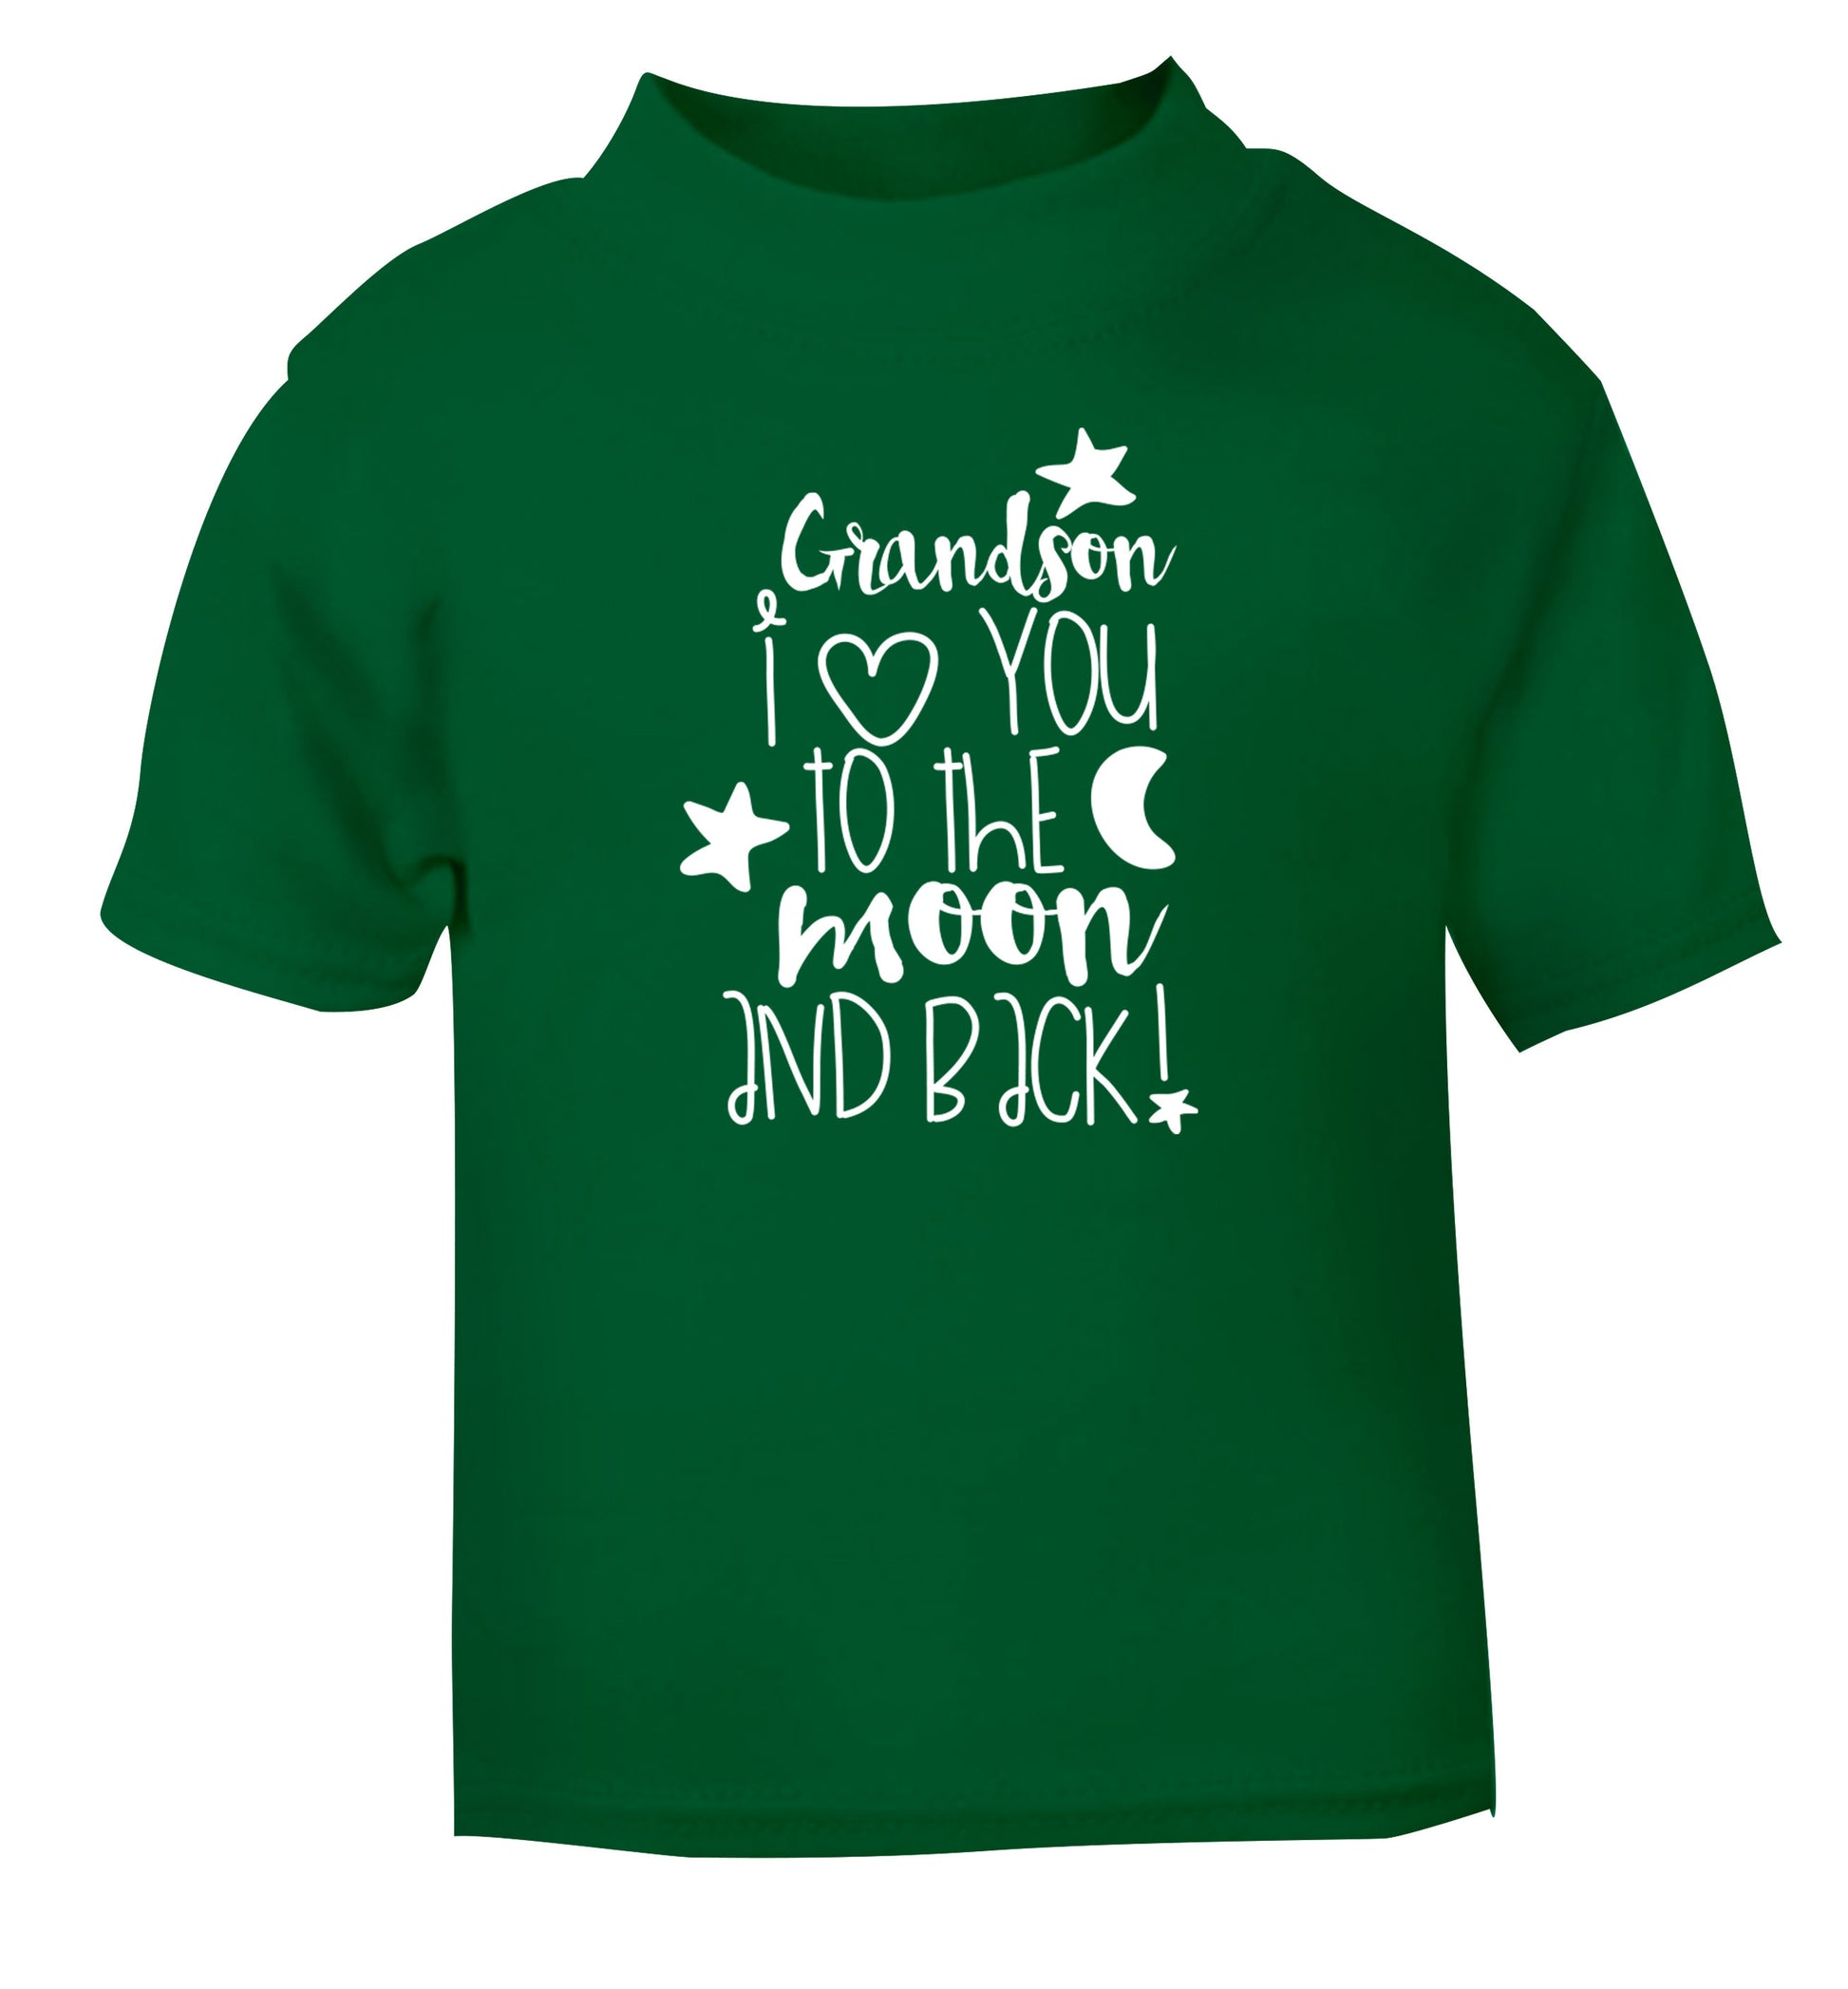 Grandson I love you to the moon and back green Baby Toddler Tshirt 2 Years